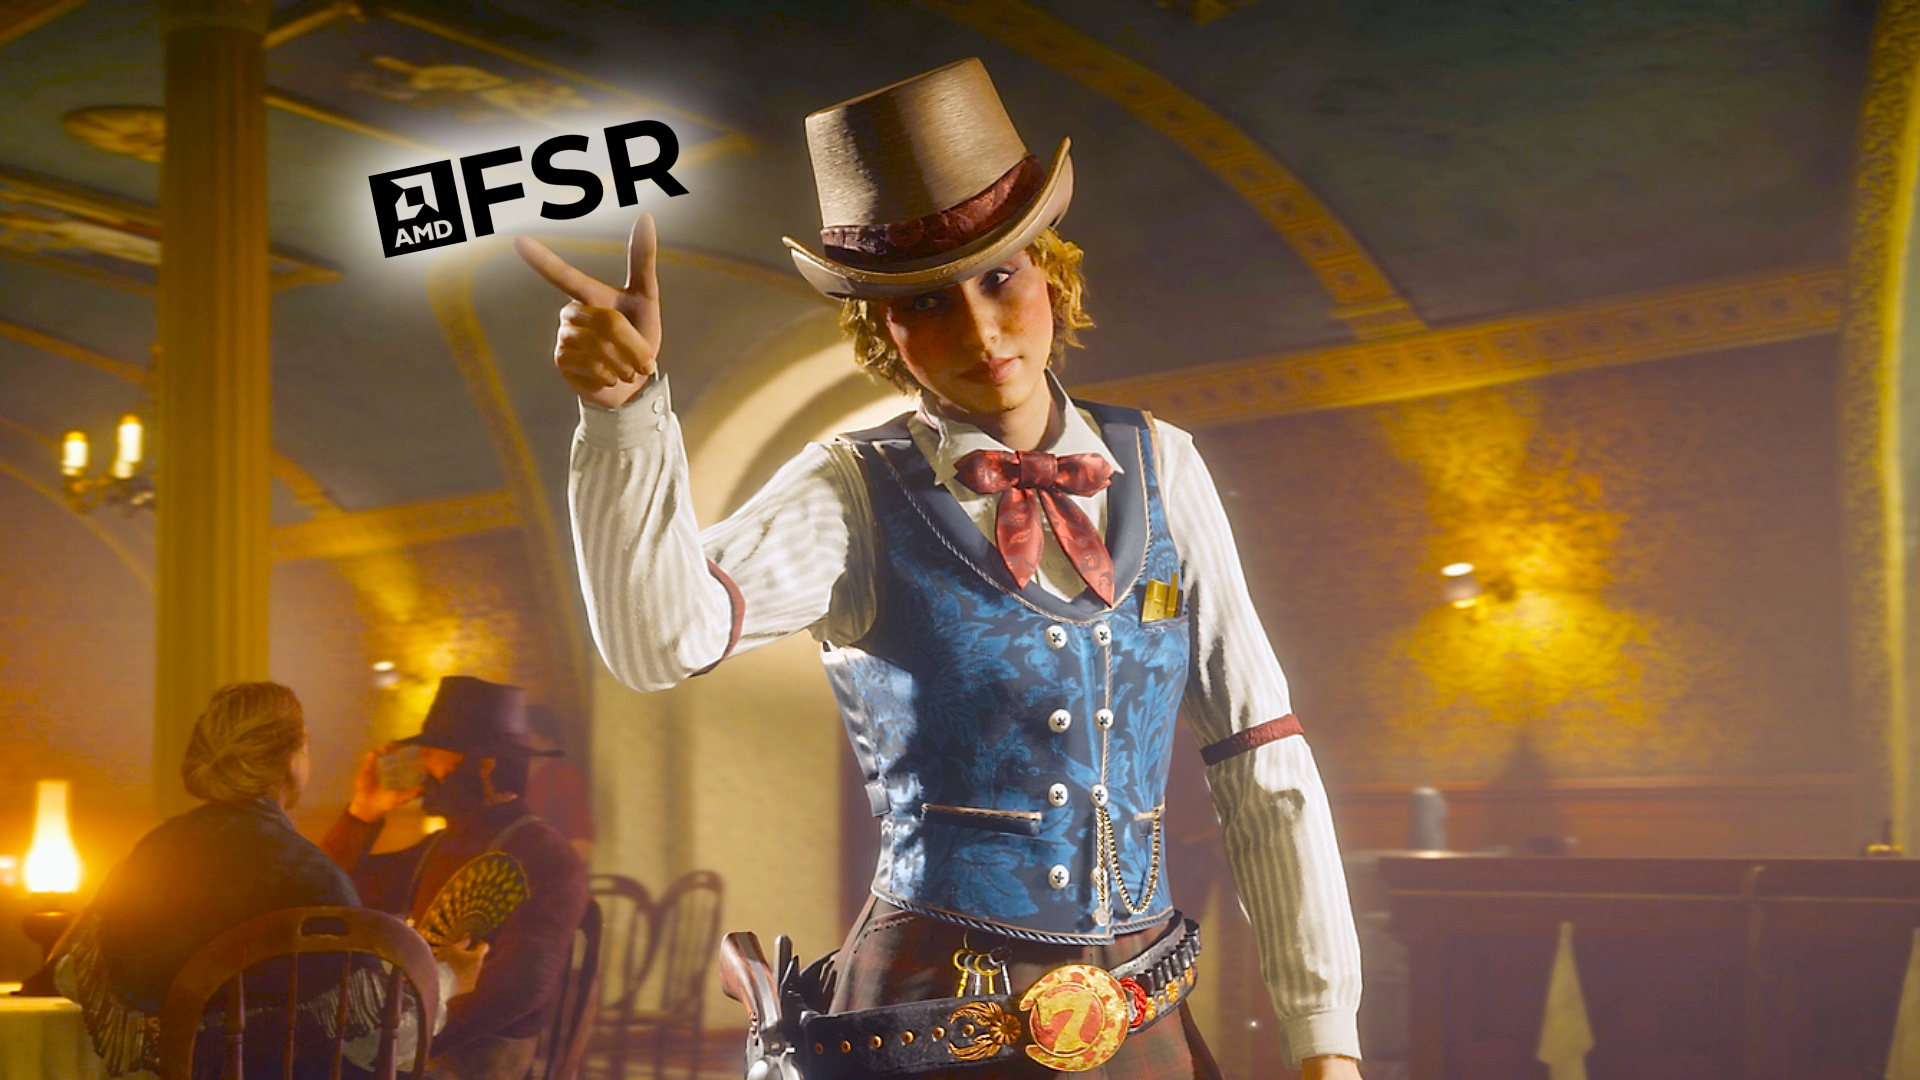 You can now play Red Dead Redemption 2 using AMD FSR 2.0